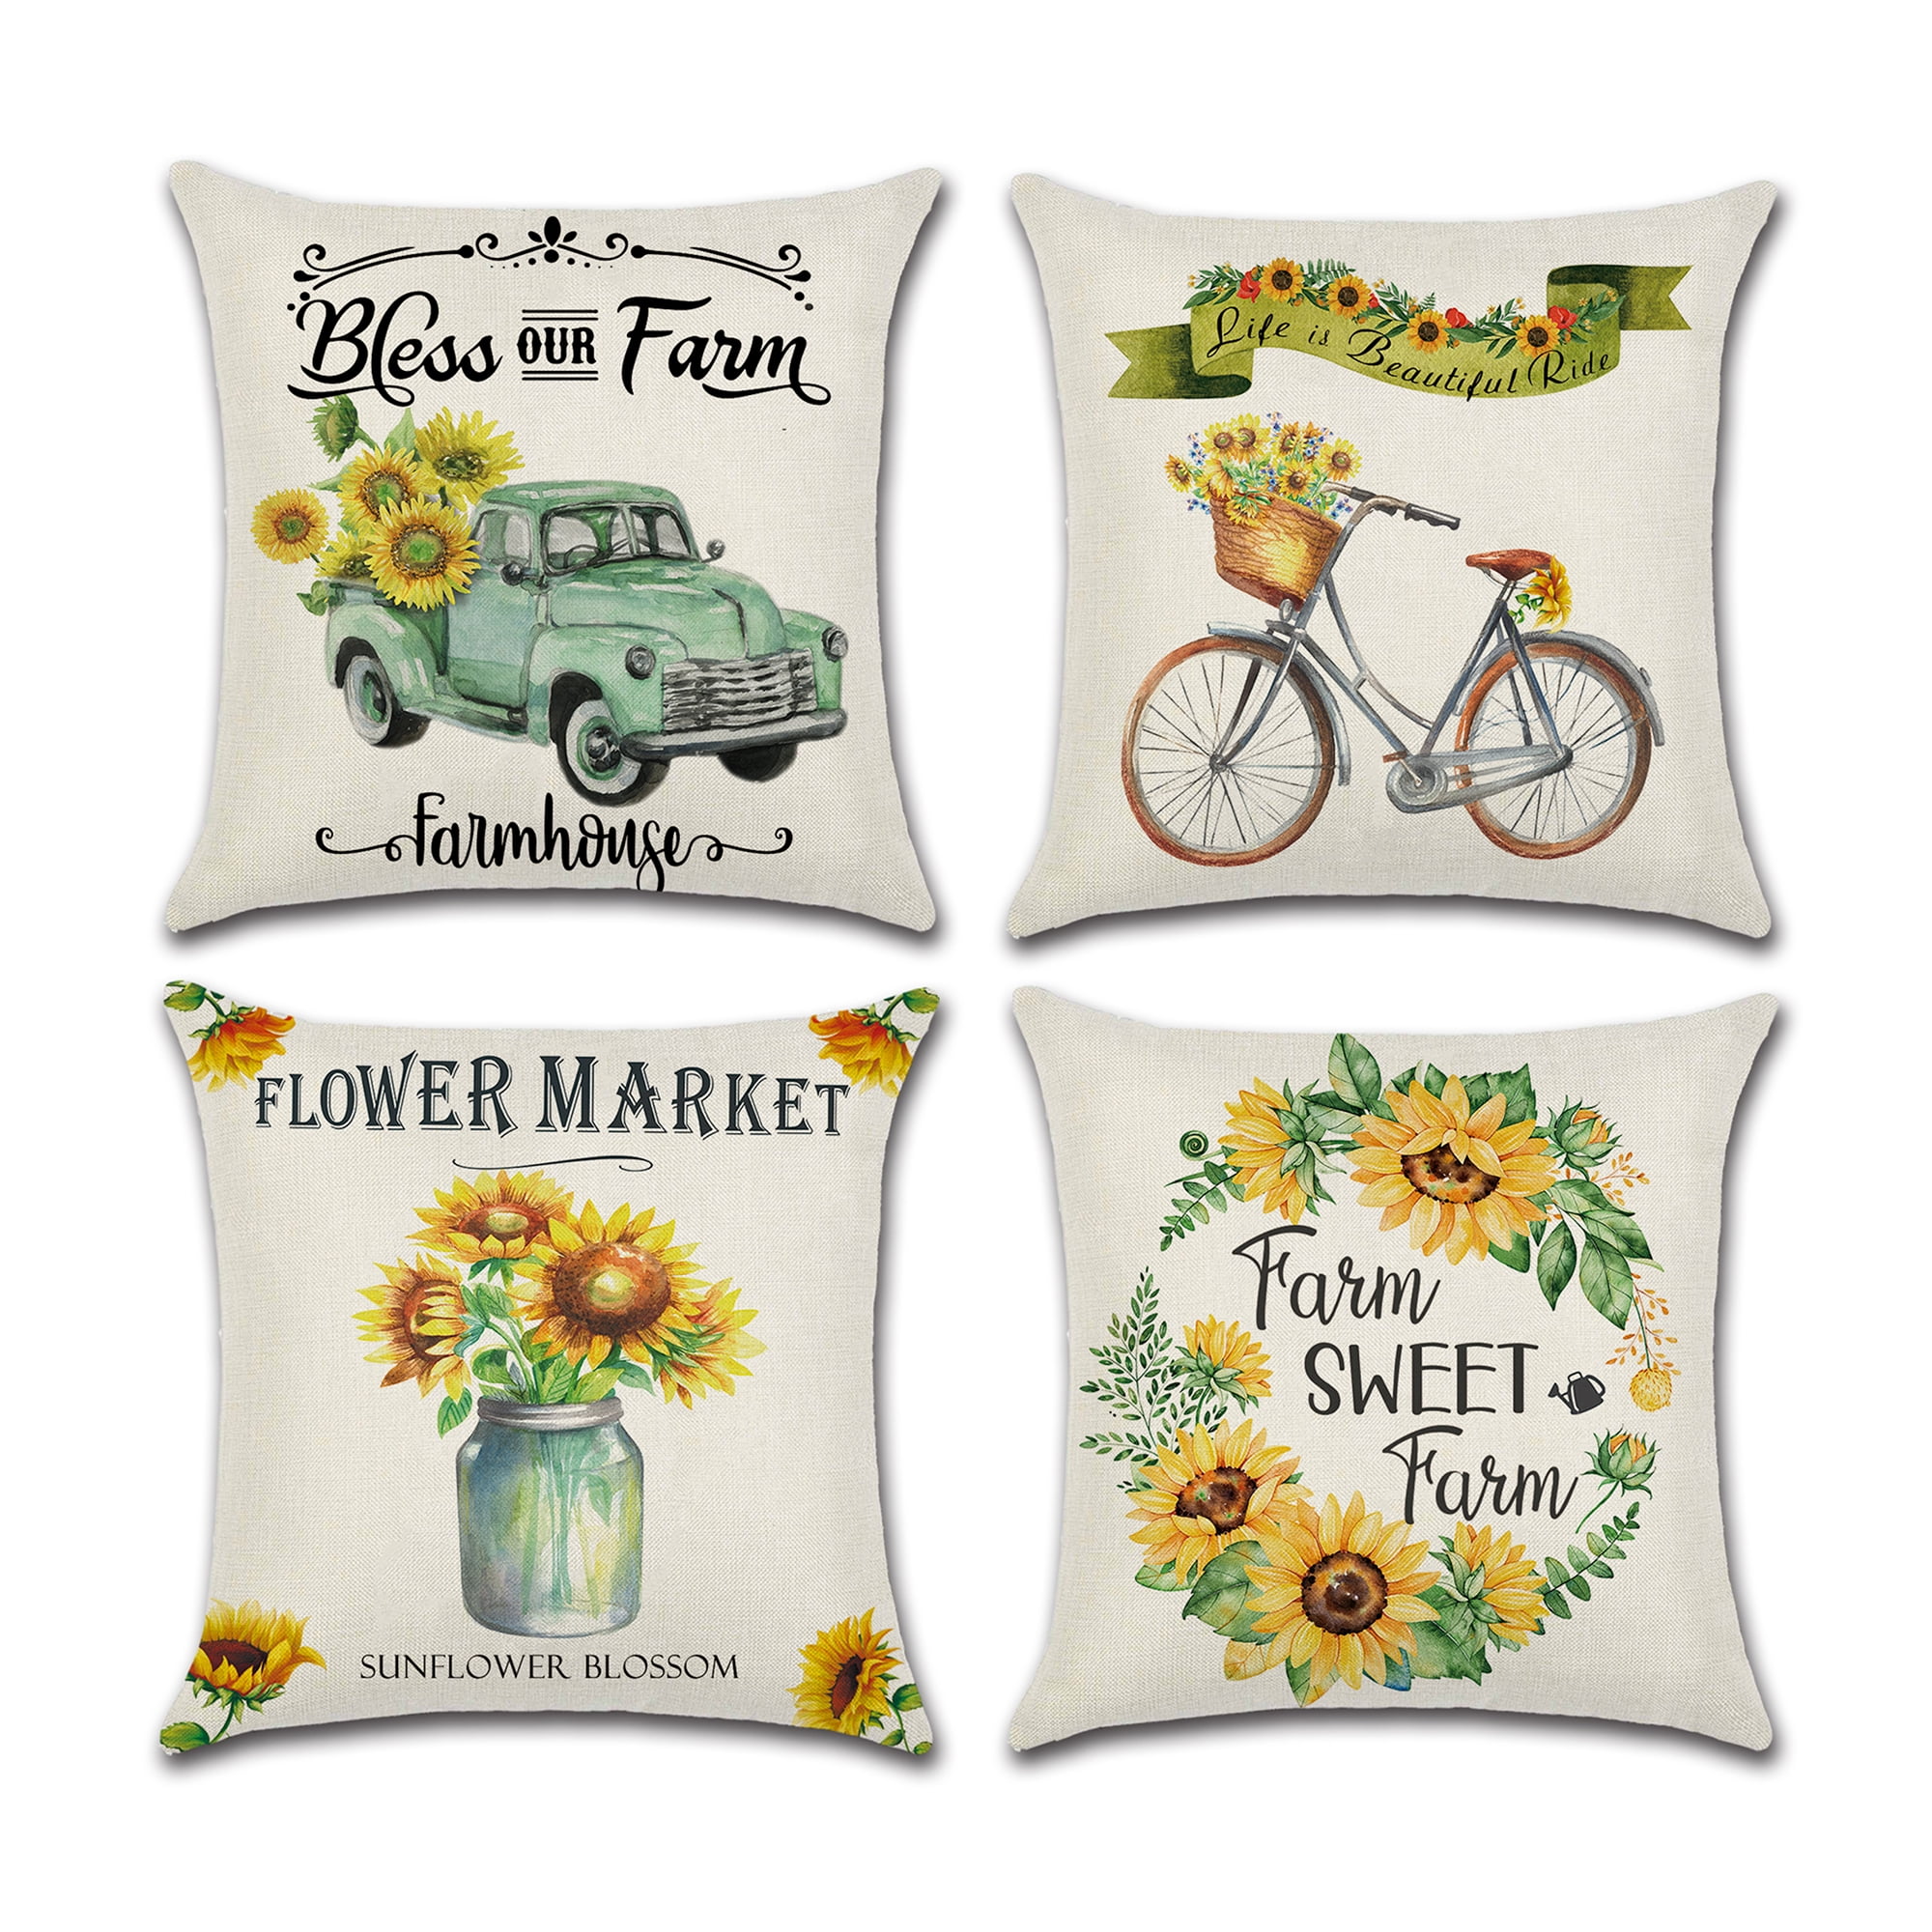 Farm Graphics and Decor Company Vintage Graphic with A Farmer Farm Tractor Throw Pillow 18x18 Multicolor